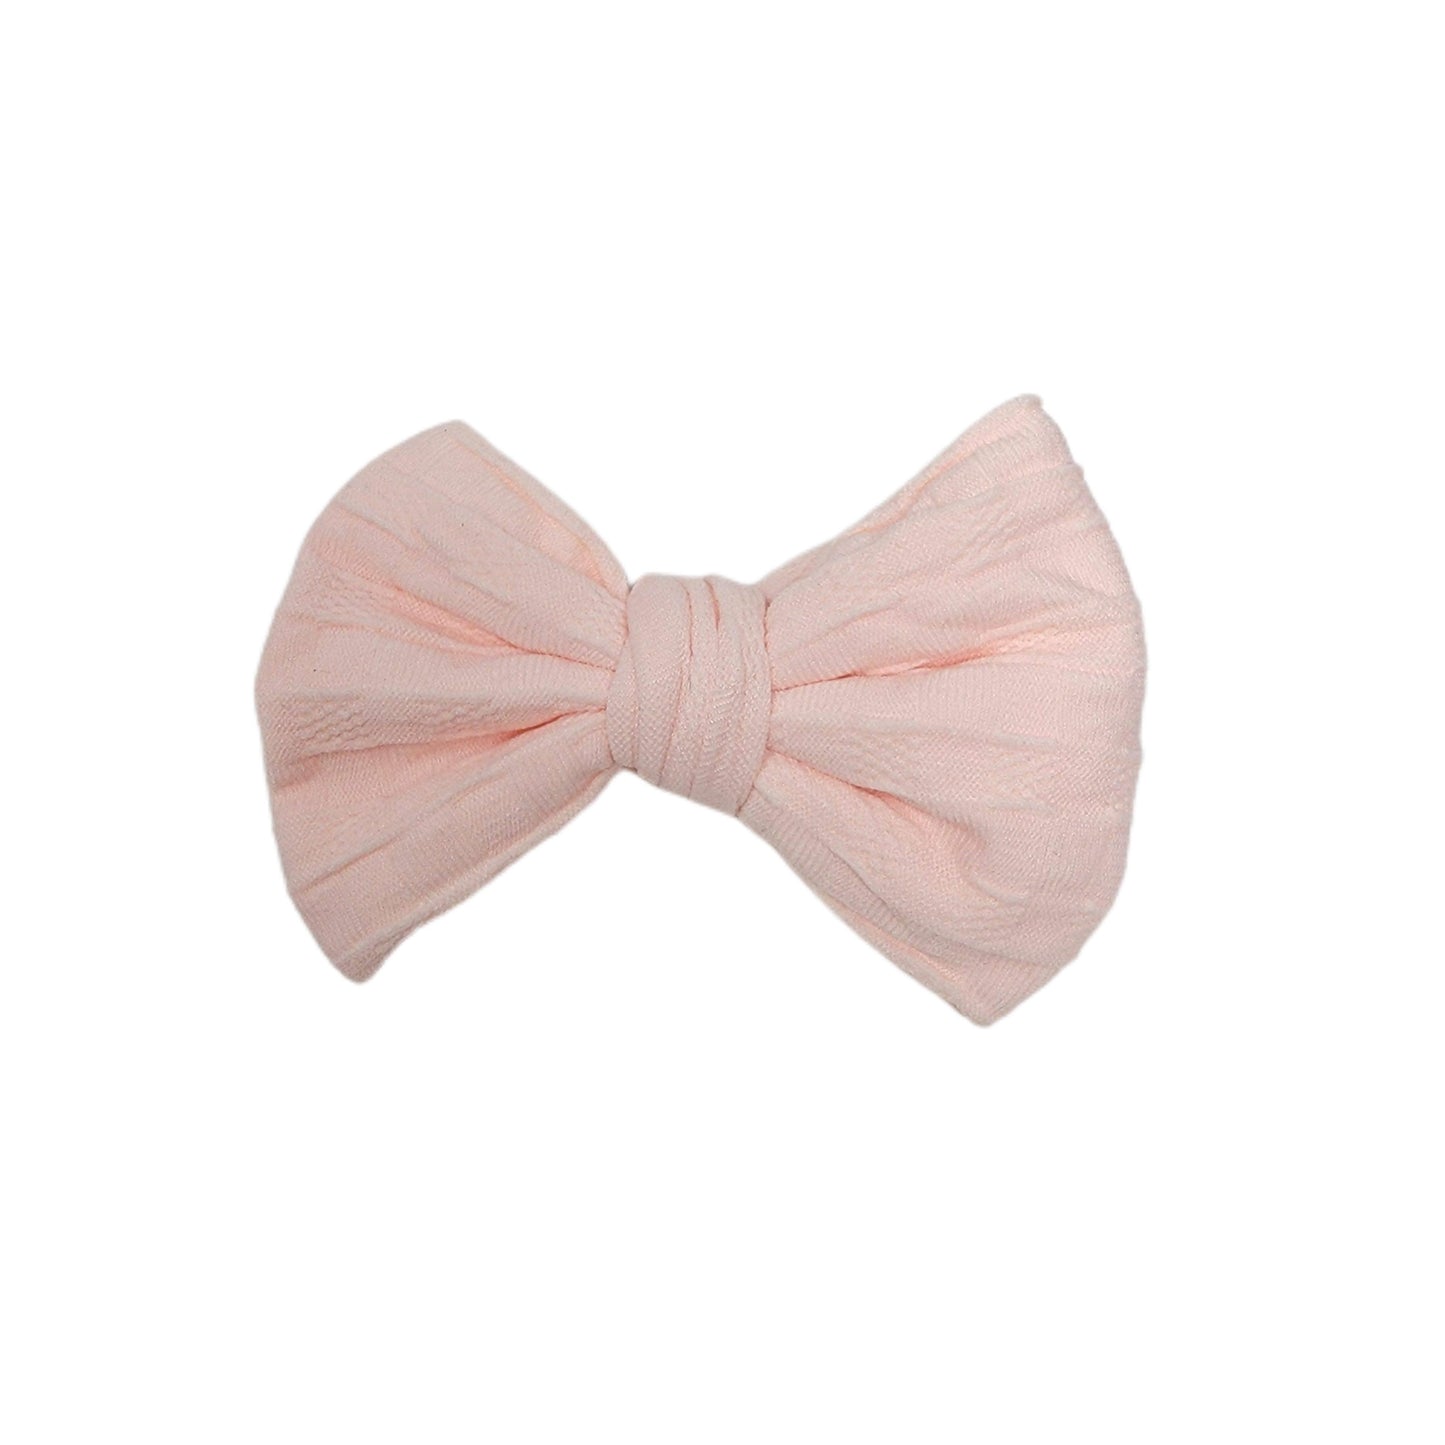 Light Pink Woven Knit Fabric Bow 4" 